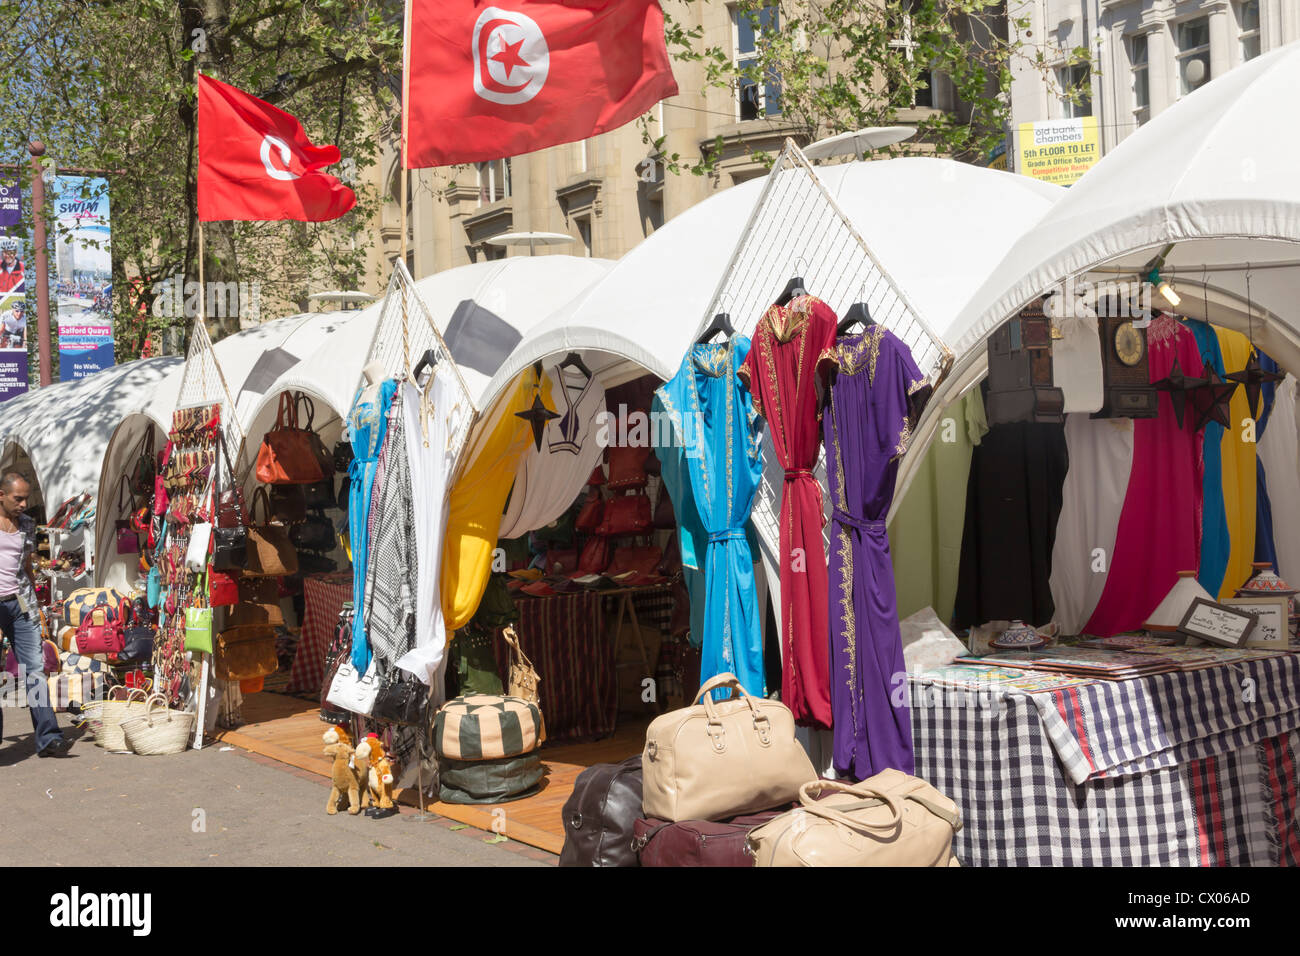 A line of stalls selling clothing and accessories at a Tunisian tourism promotional street market in Manchester in May 2012. Stock Photo